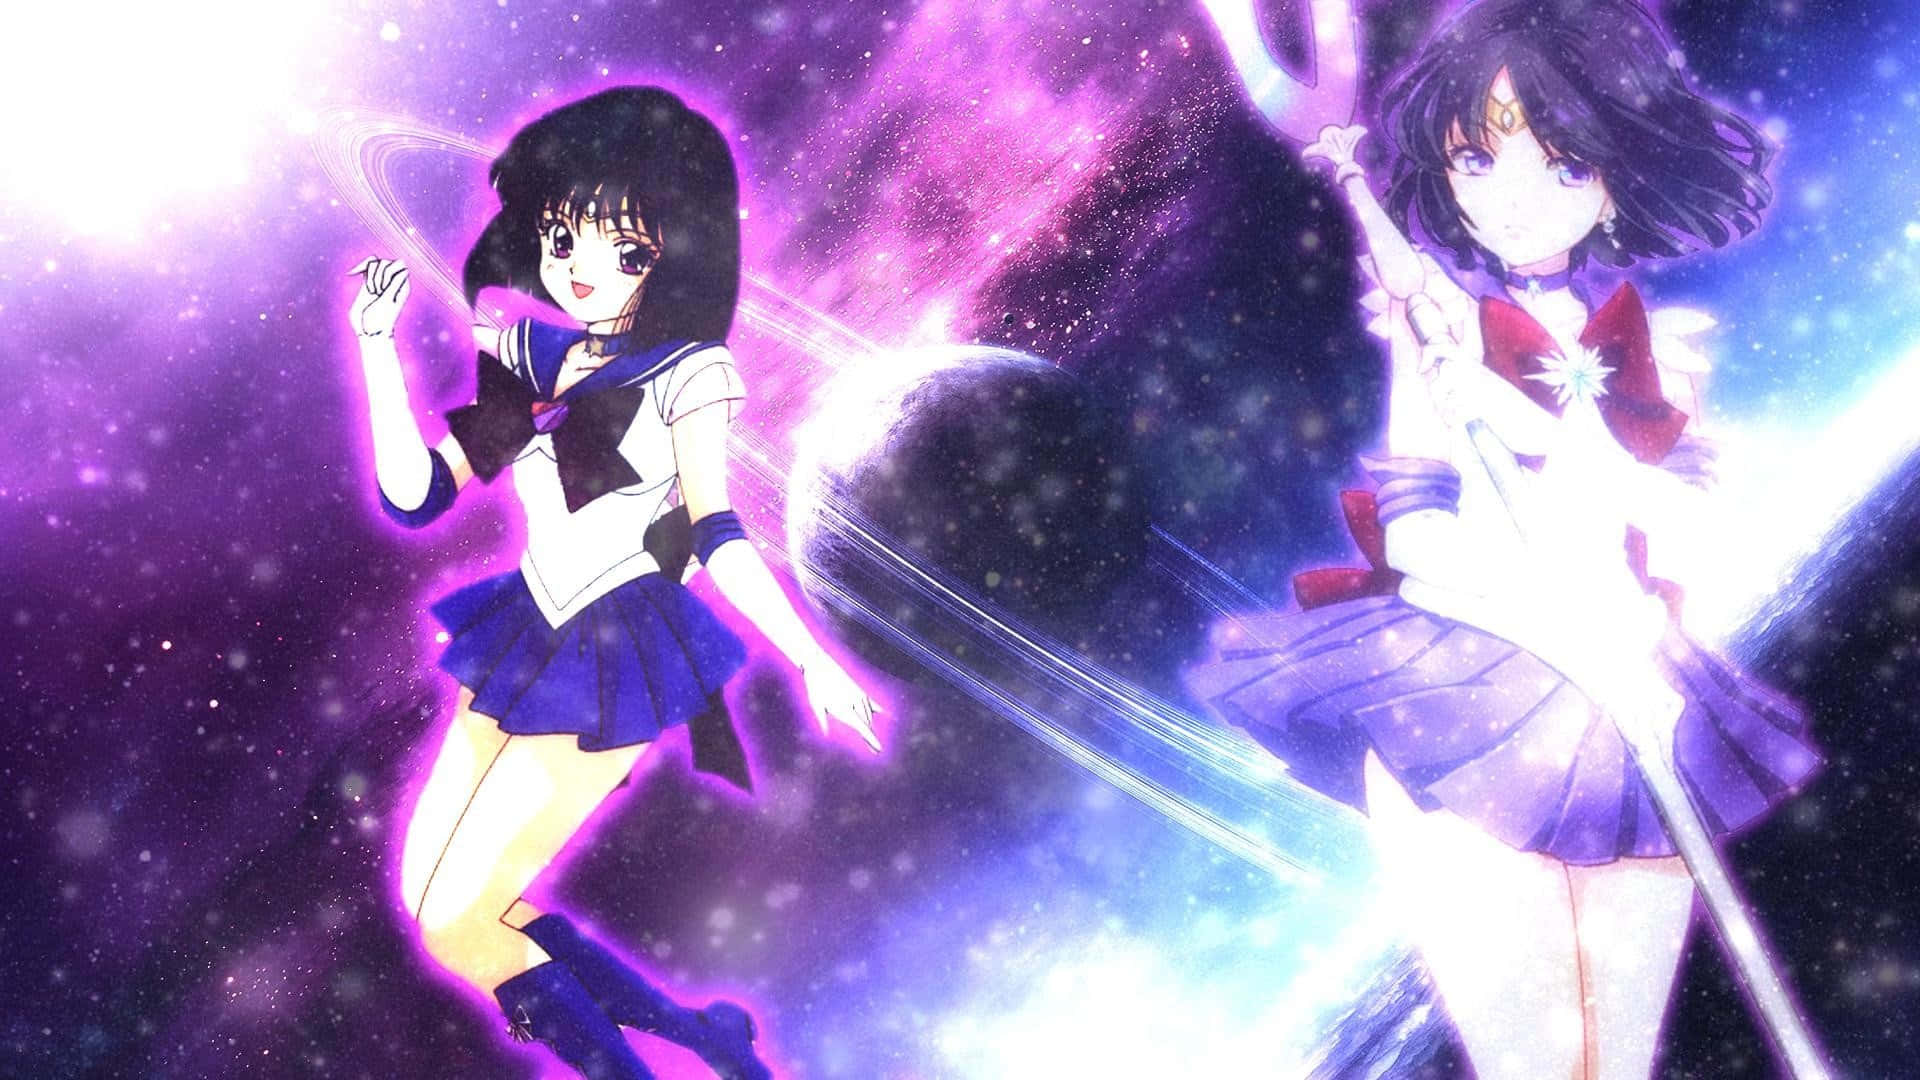 “The Powerful Sailor Saturn Protecting All That She Holds Dear” Wallpaper